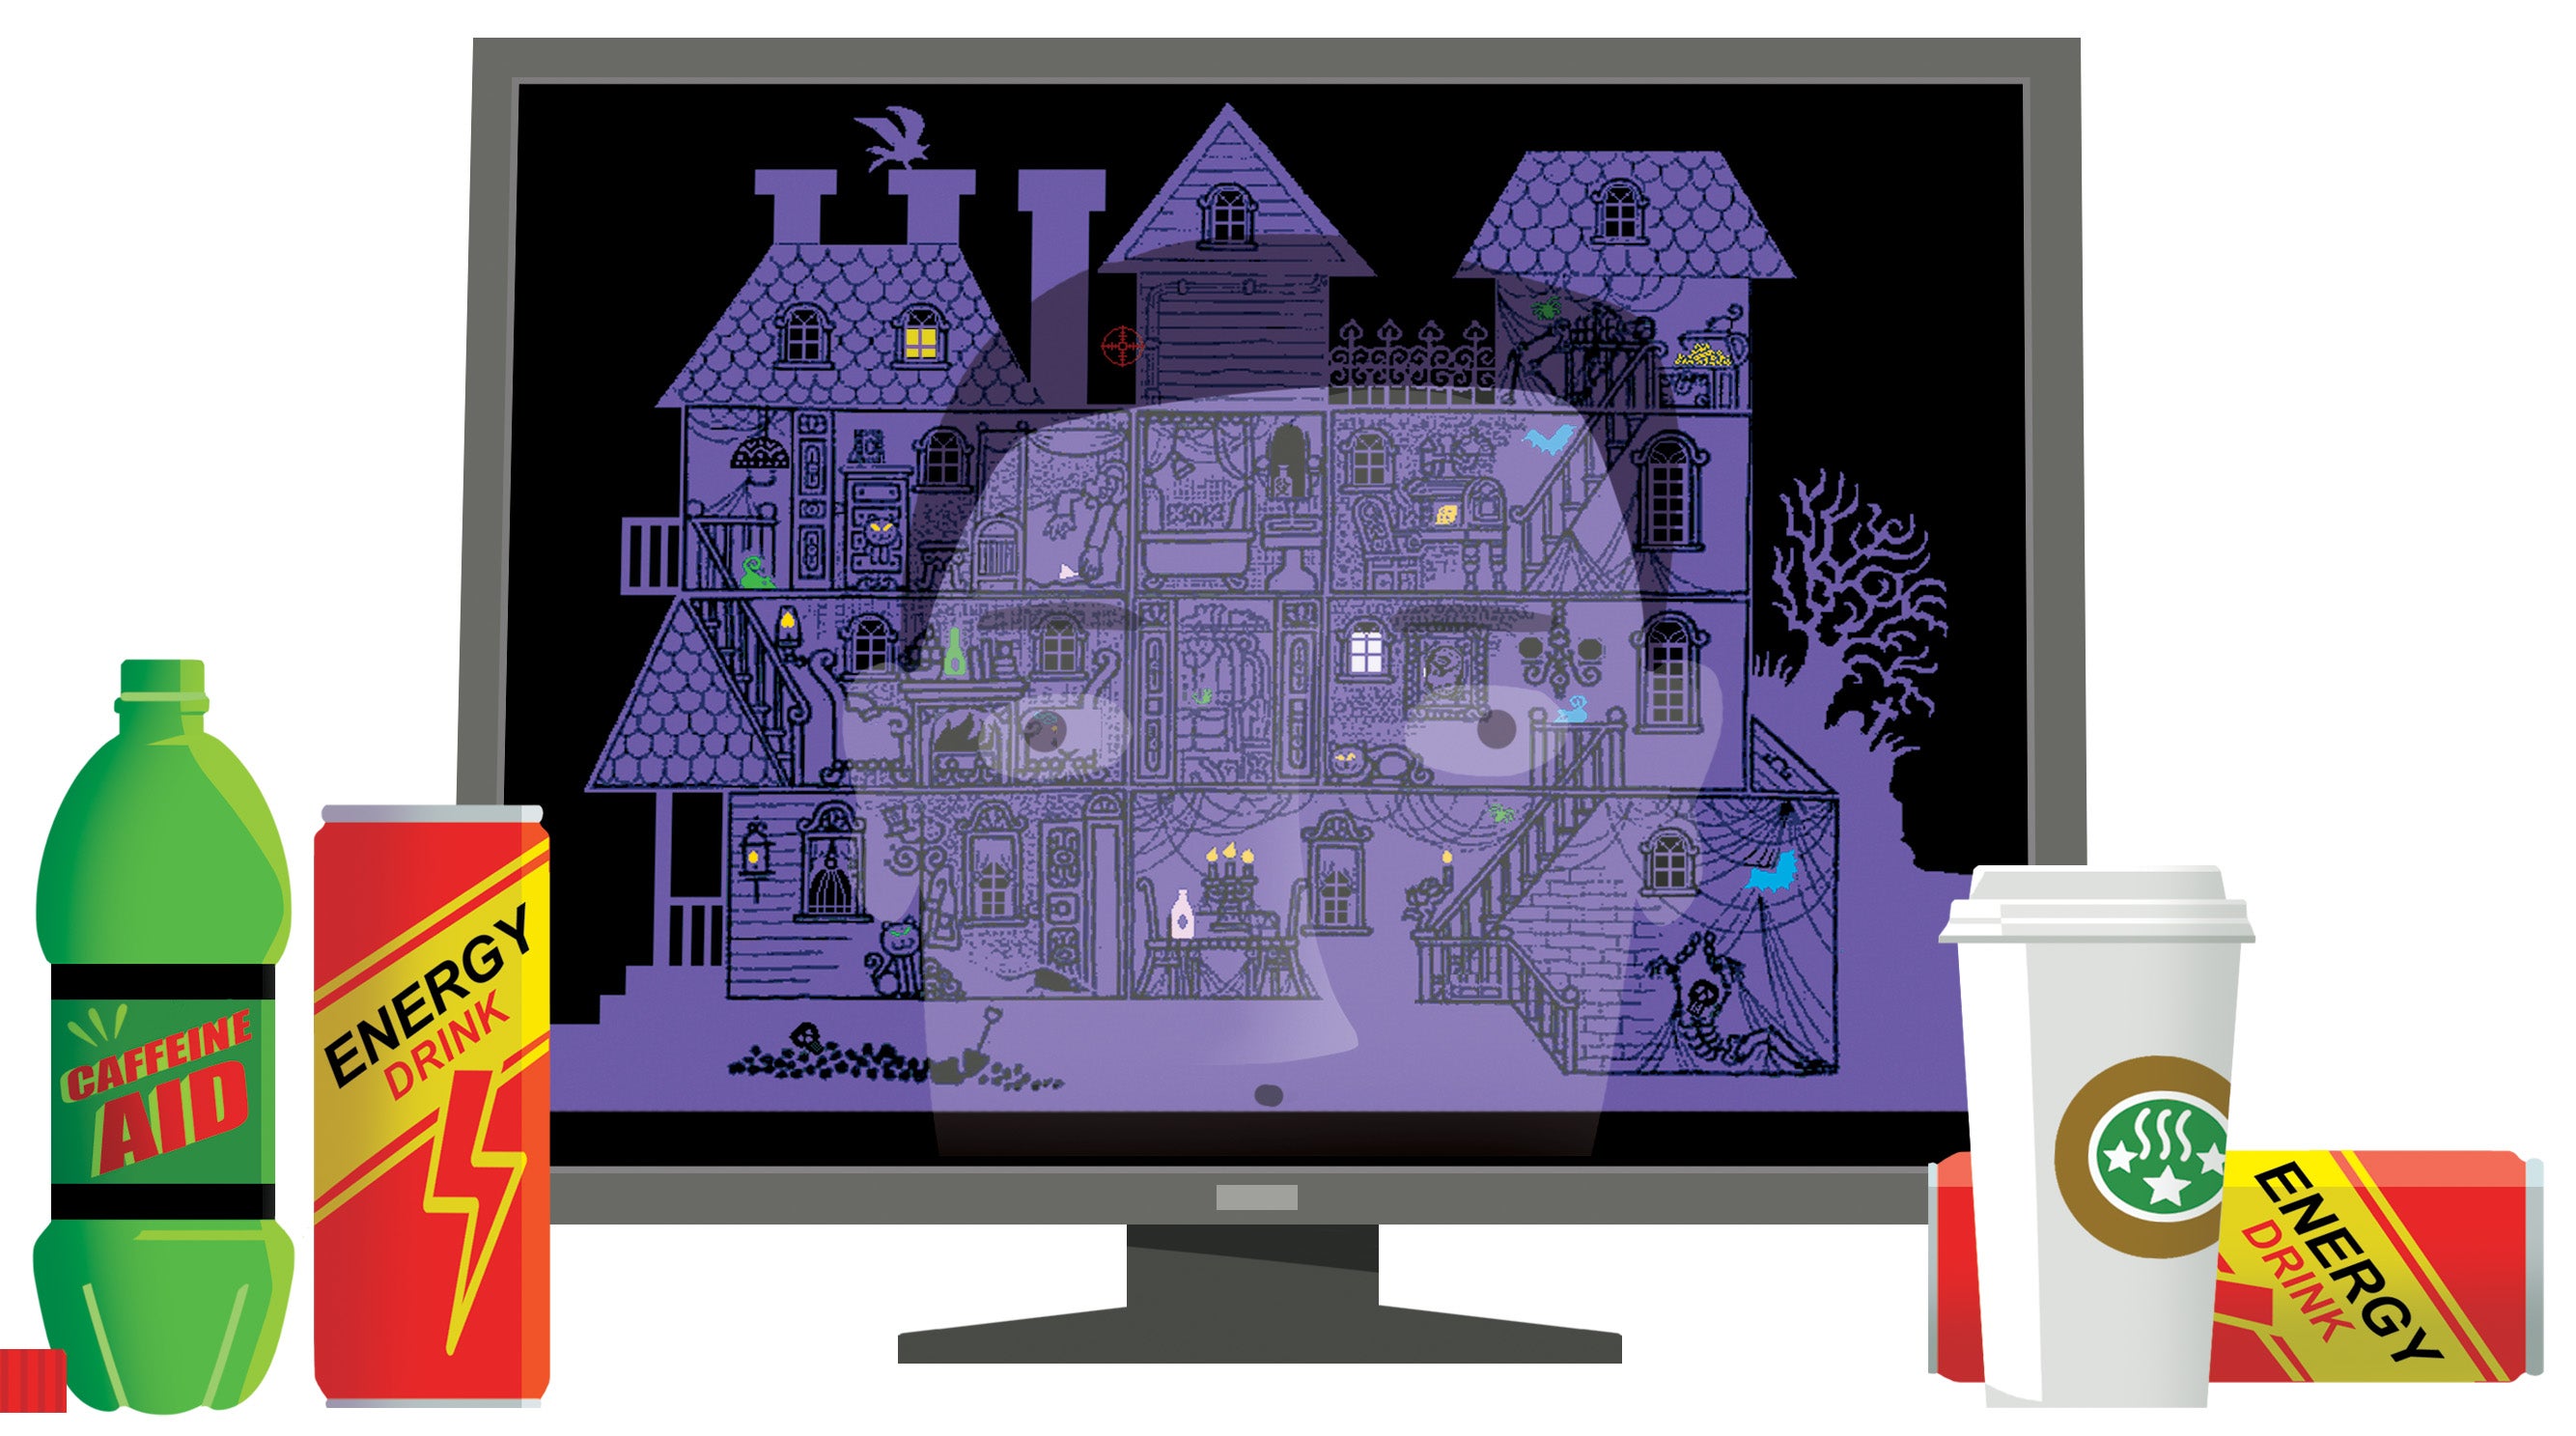 A screen showing a multi-level haunted house reflects the face of the mesmerized gamer, whose discarded caffeine drink containers sit beside the screen